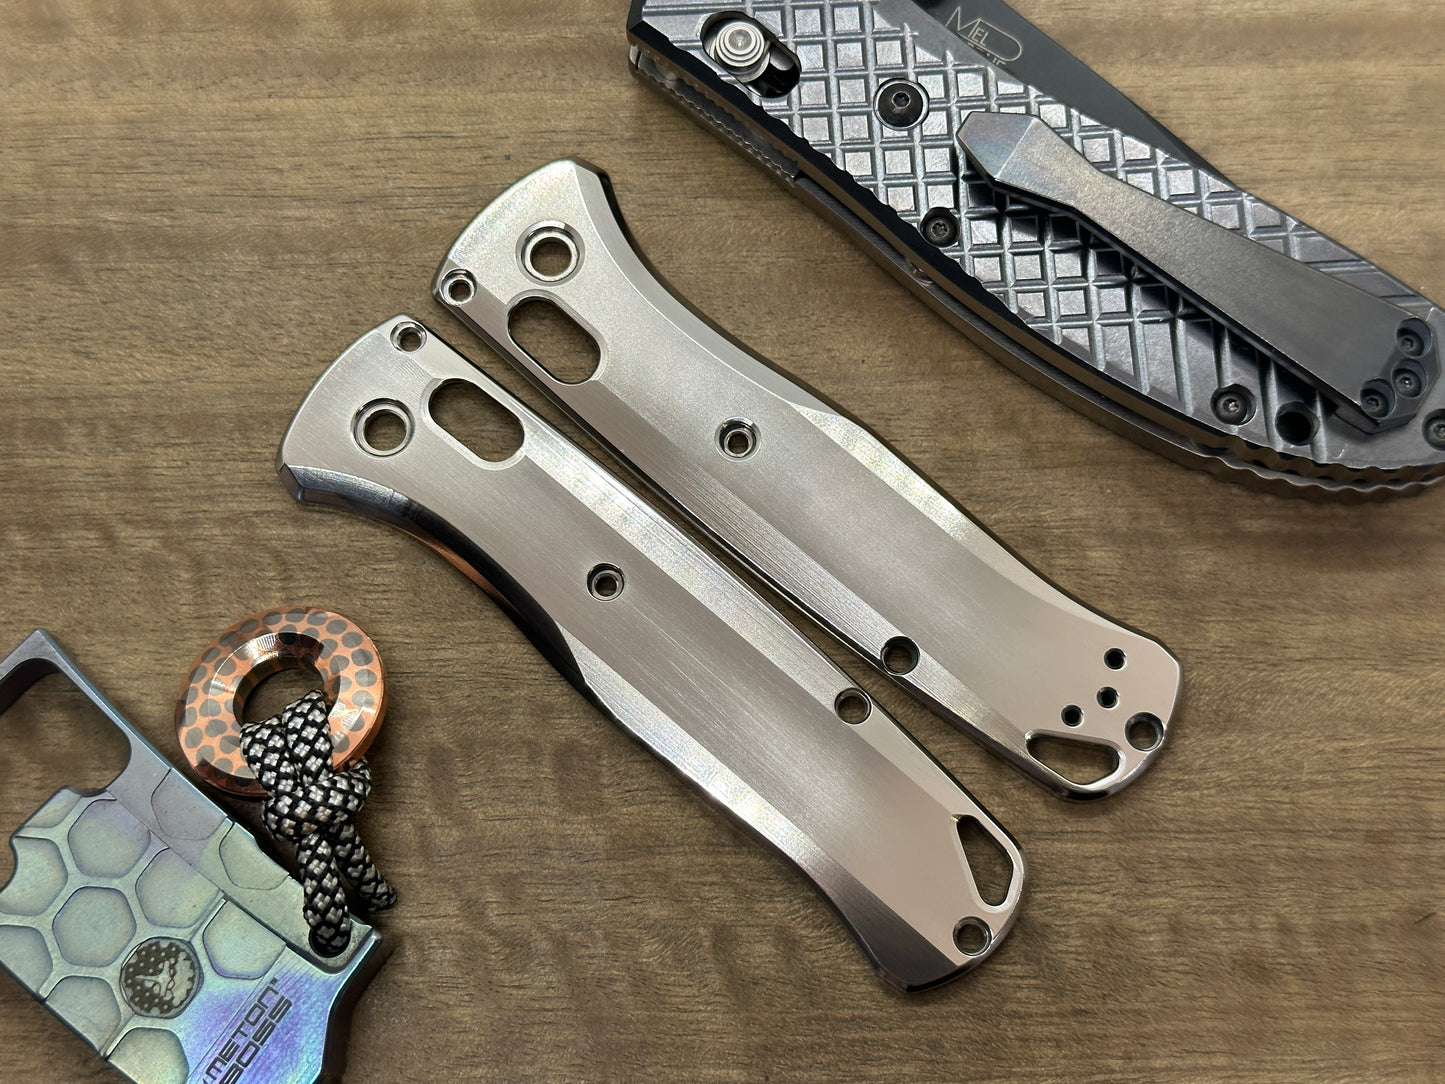 POLISHED Titanium Scales for Benchmade Bugout 535